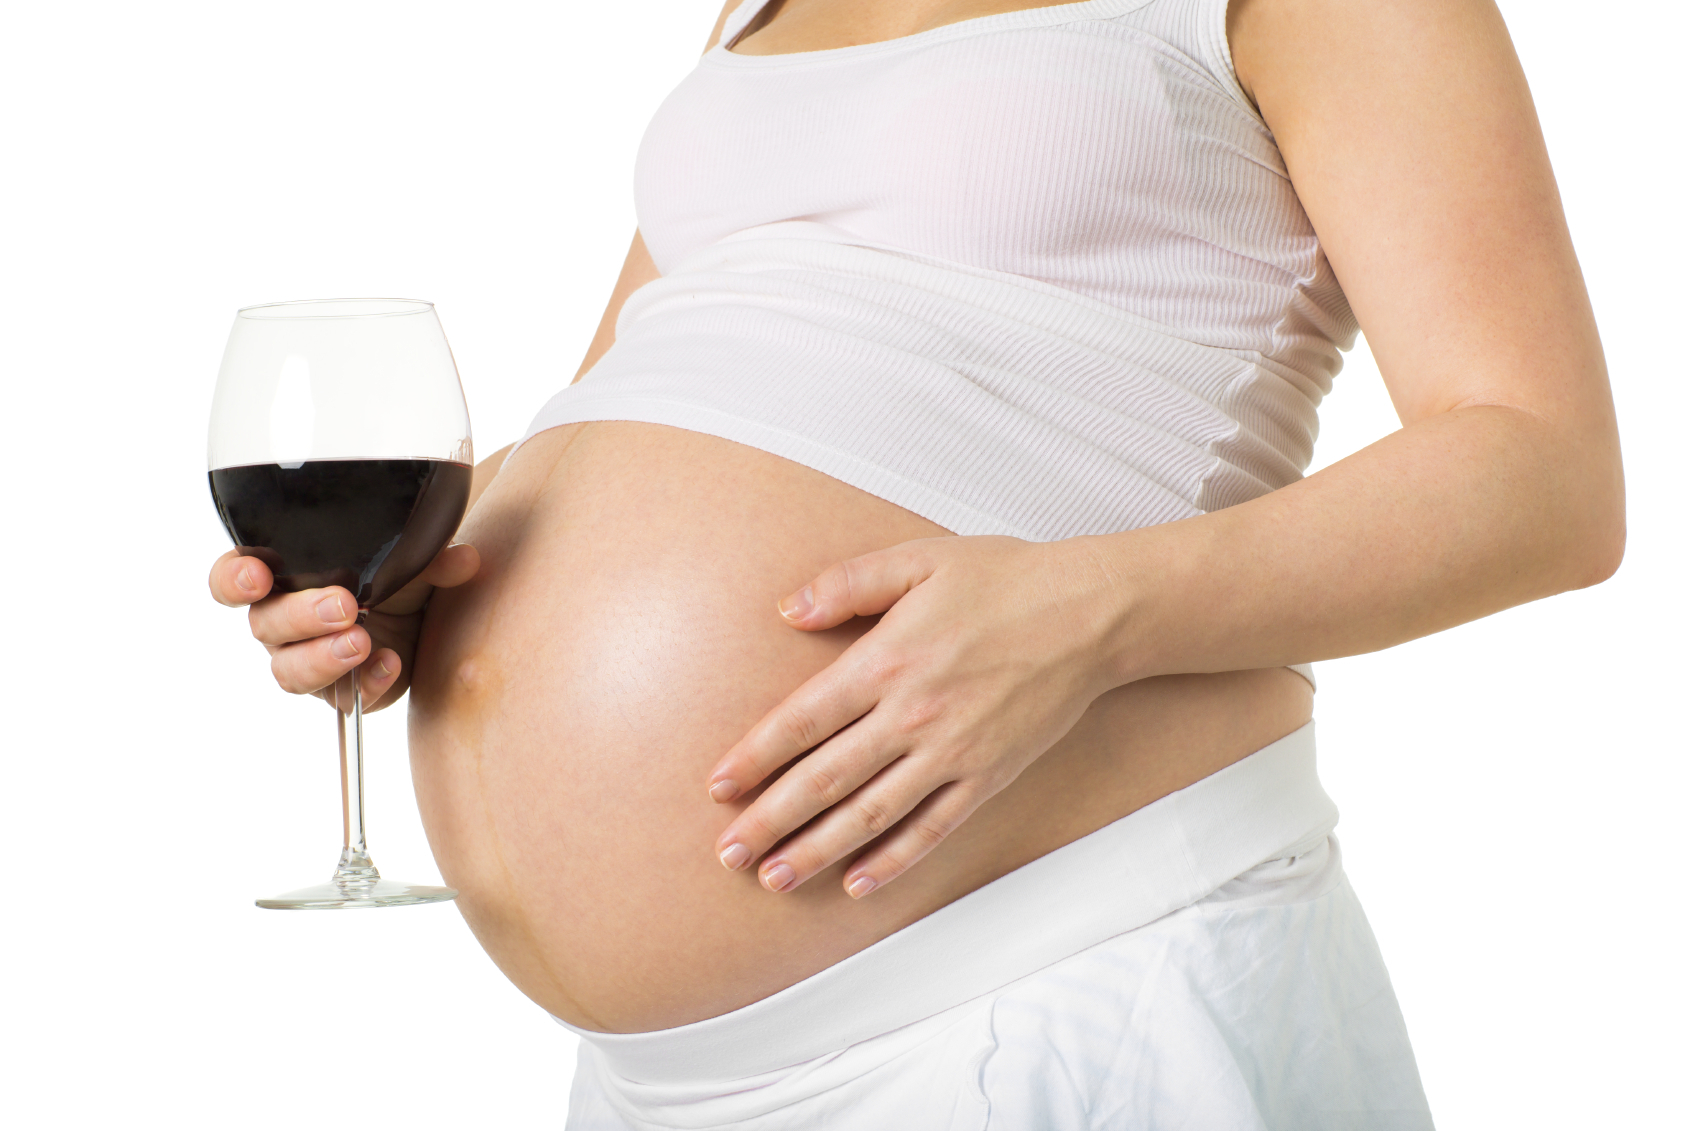 Medical advice warns against drinking alcohol while pregnant (Getty Images)